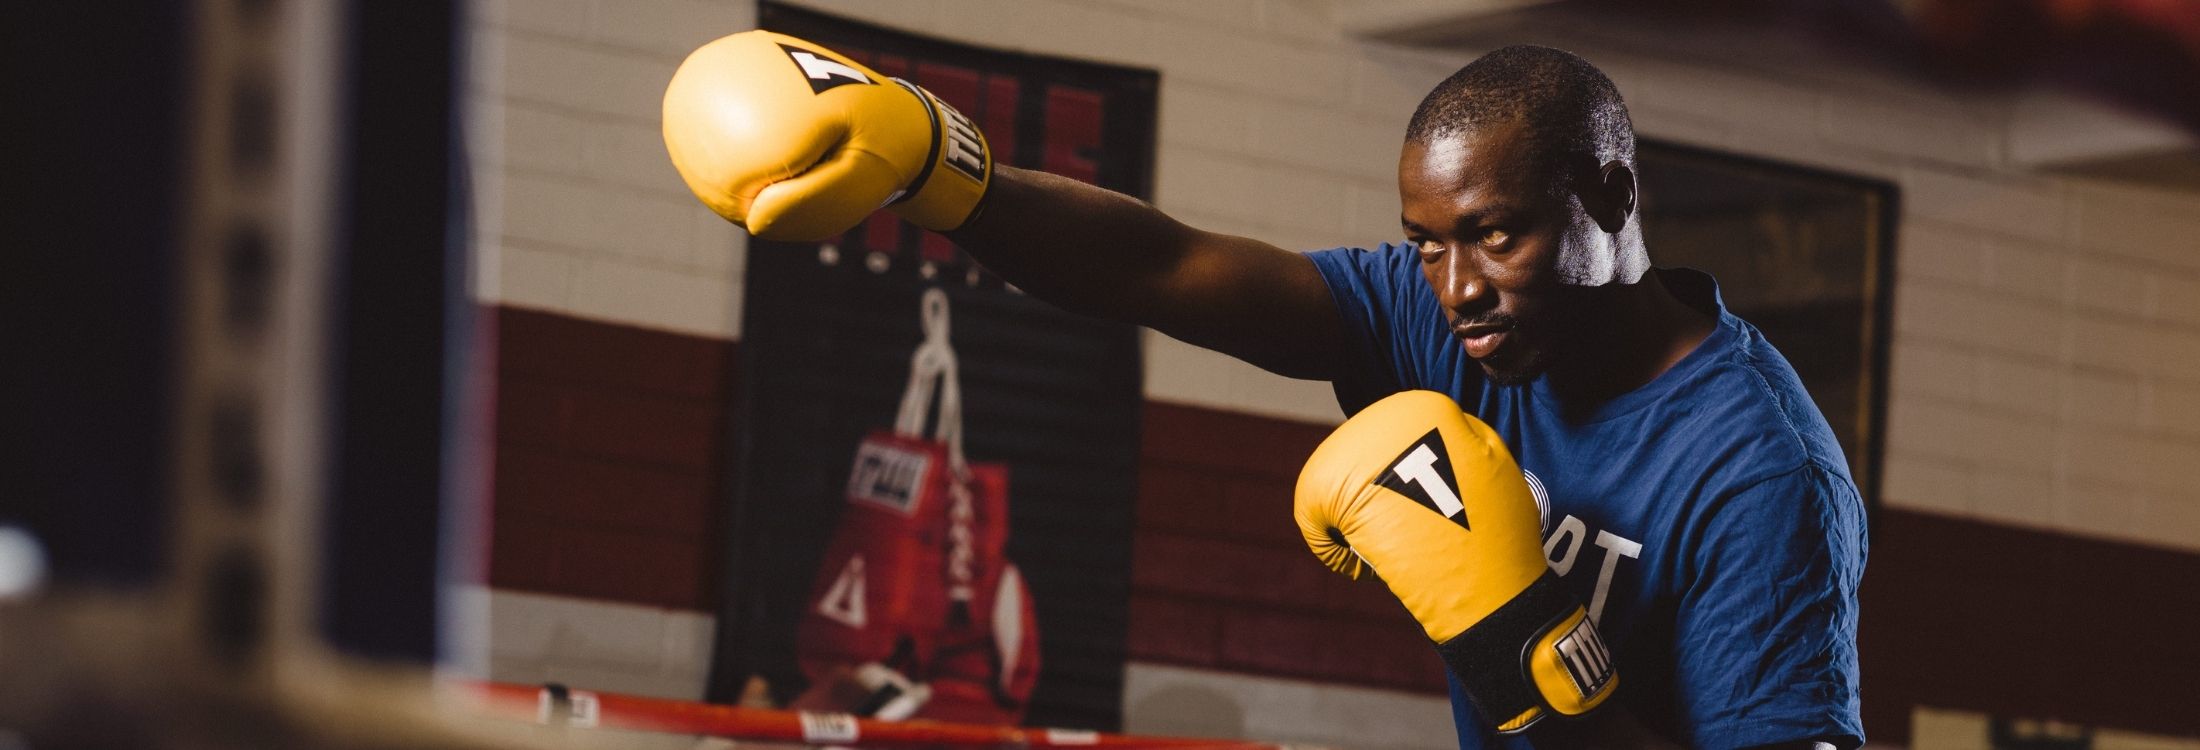 Hassan Badjdi, a 2019 Sport 4 Community participant from Senegal, stands looking to the left wearing a navy blue shirt, posing in a straight punch stance wearing bright yellow boxing gloves.